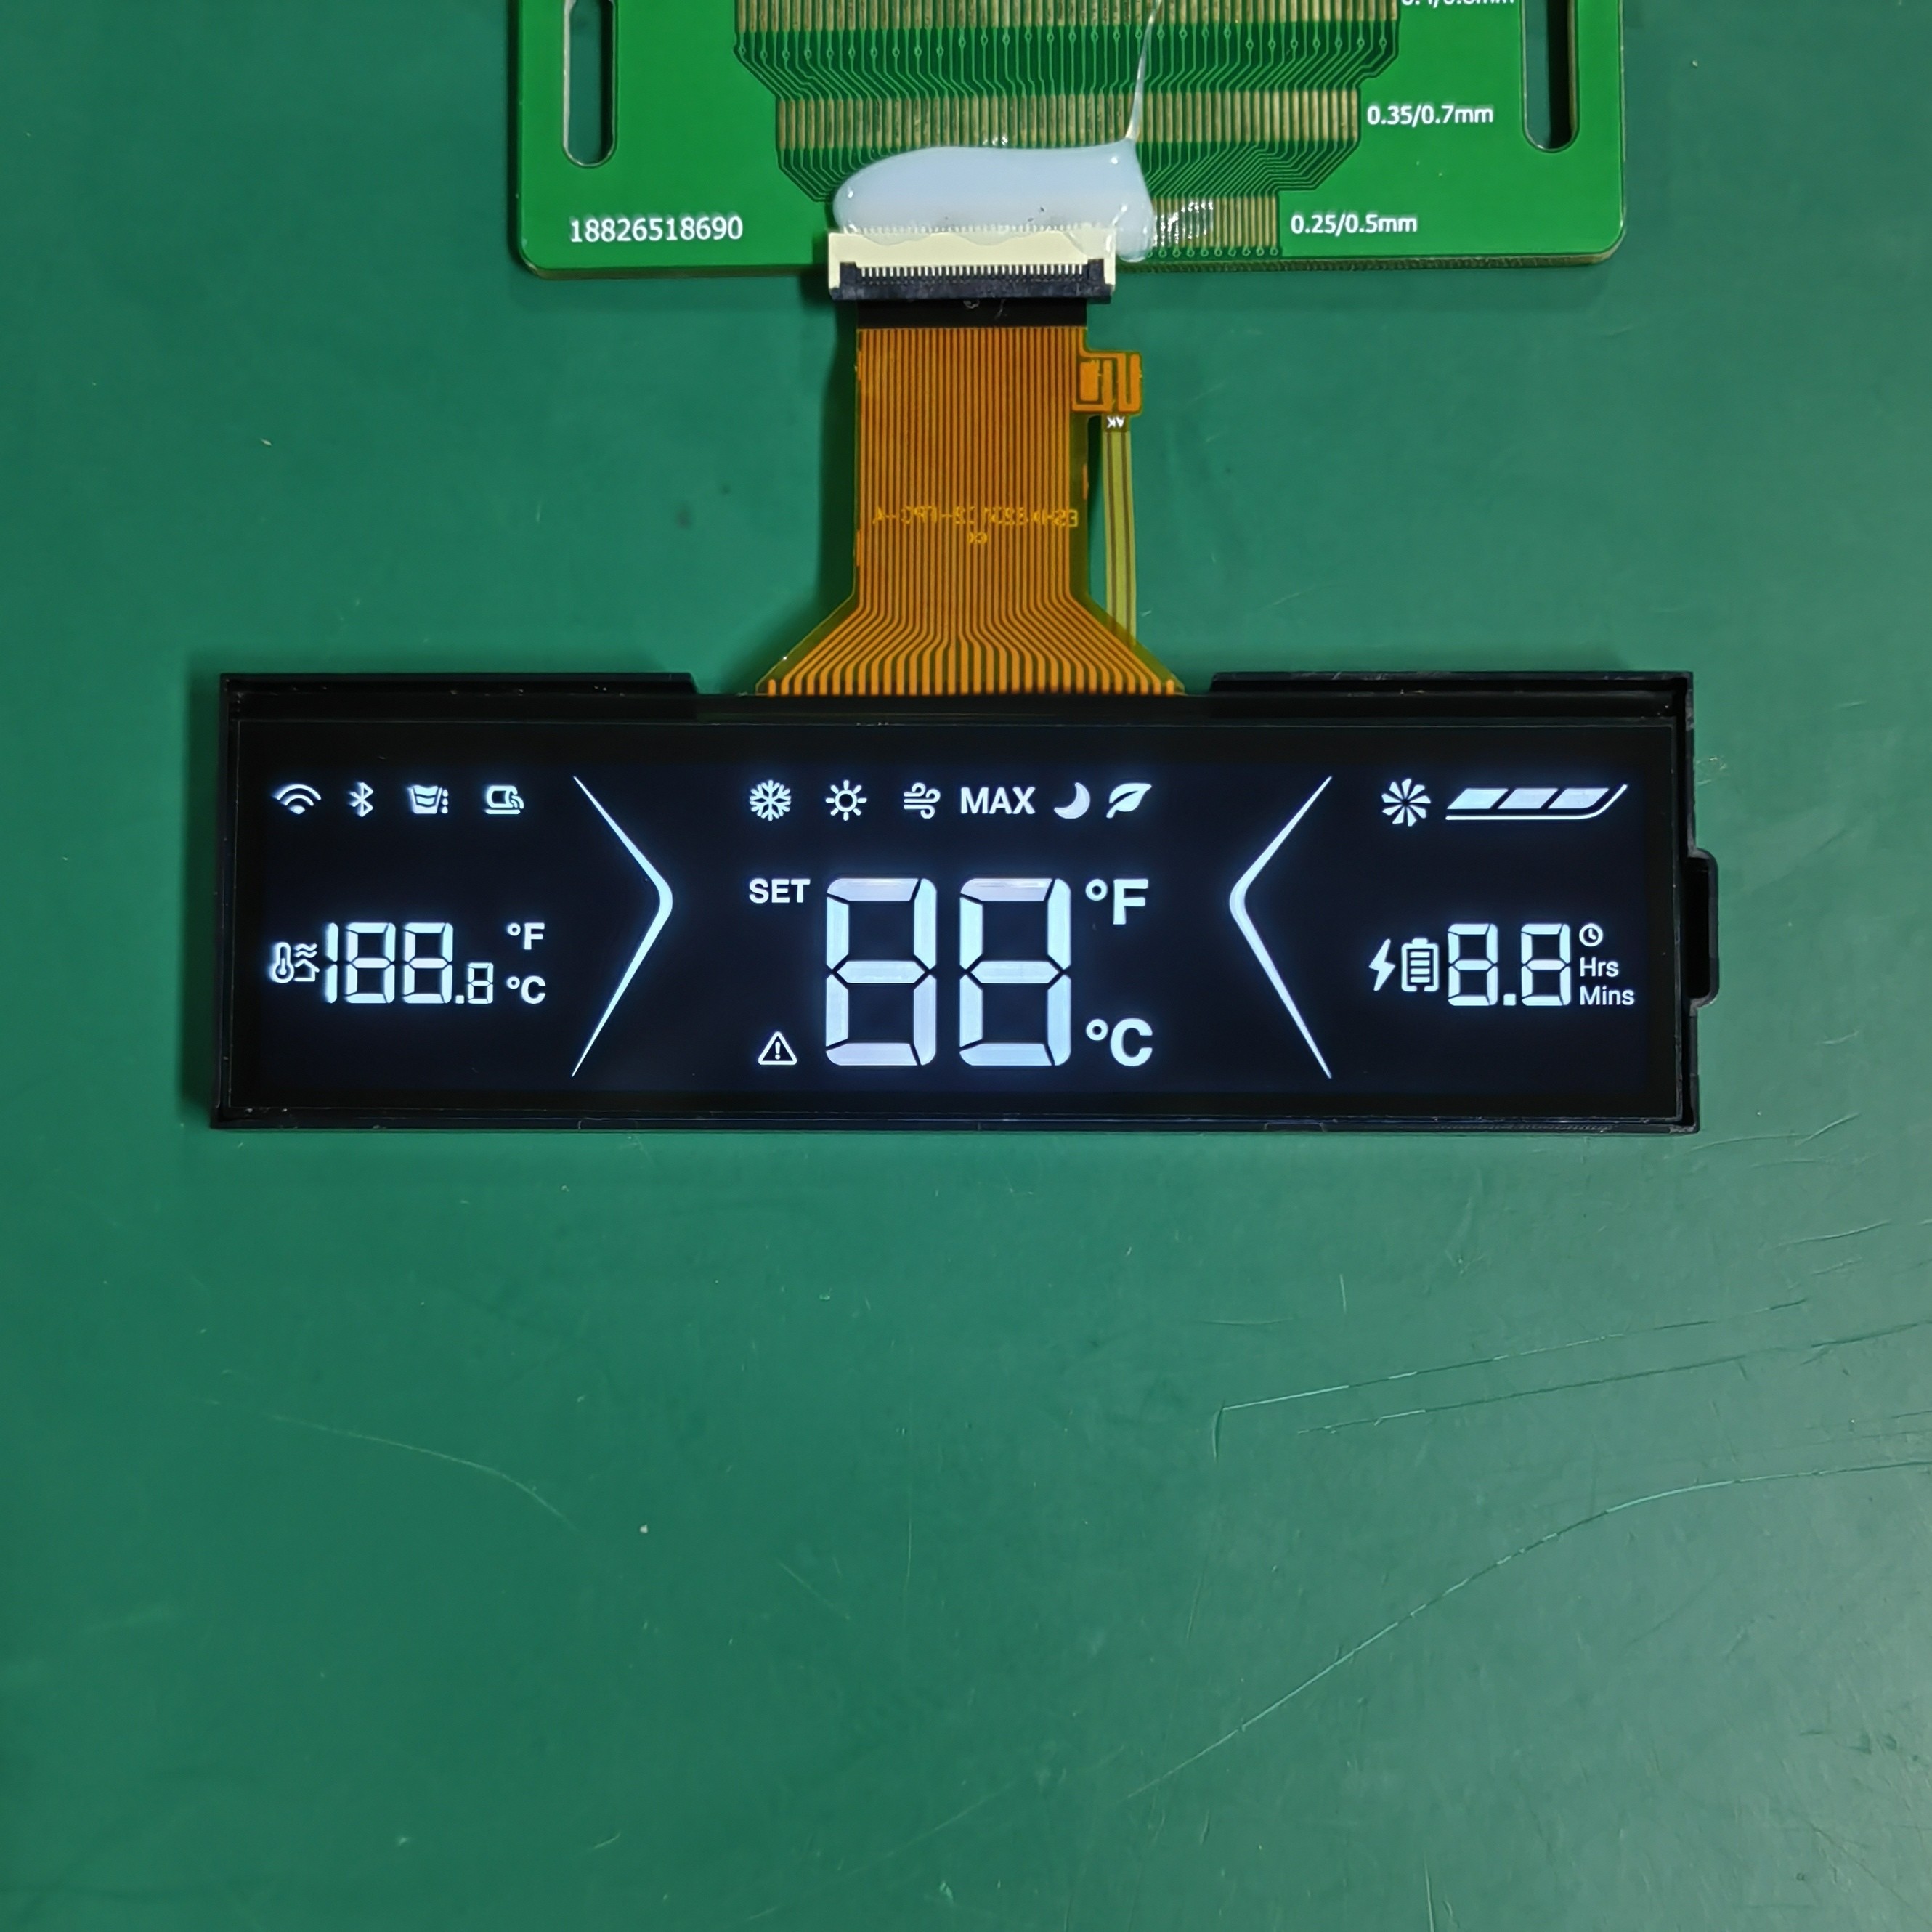 China 20x4 8x1 16x2 character LCD display STN Fstn 1602 LCD Module Customized Backlight Optional factory